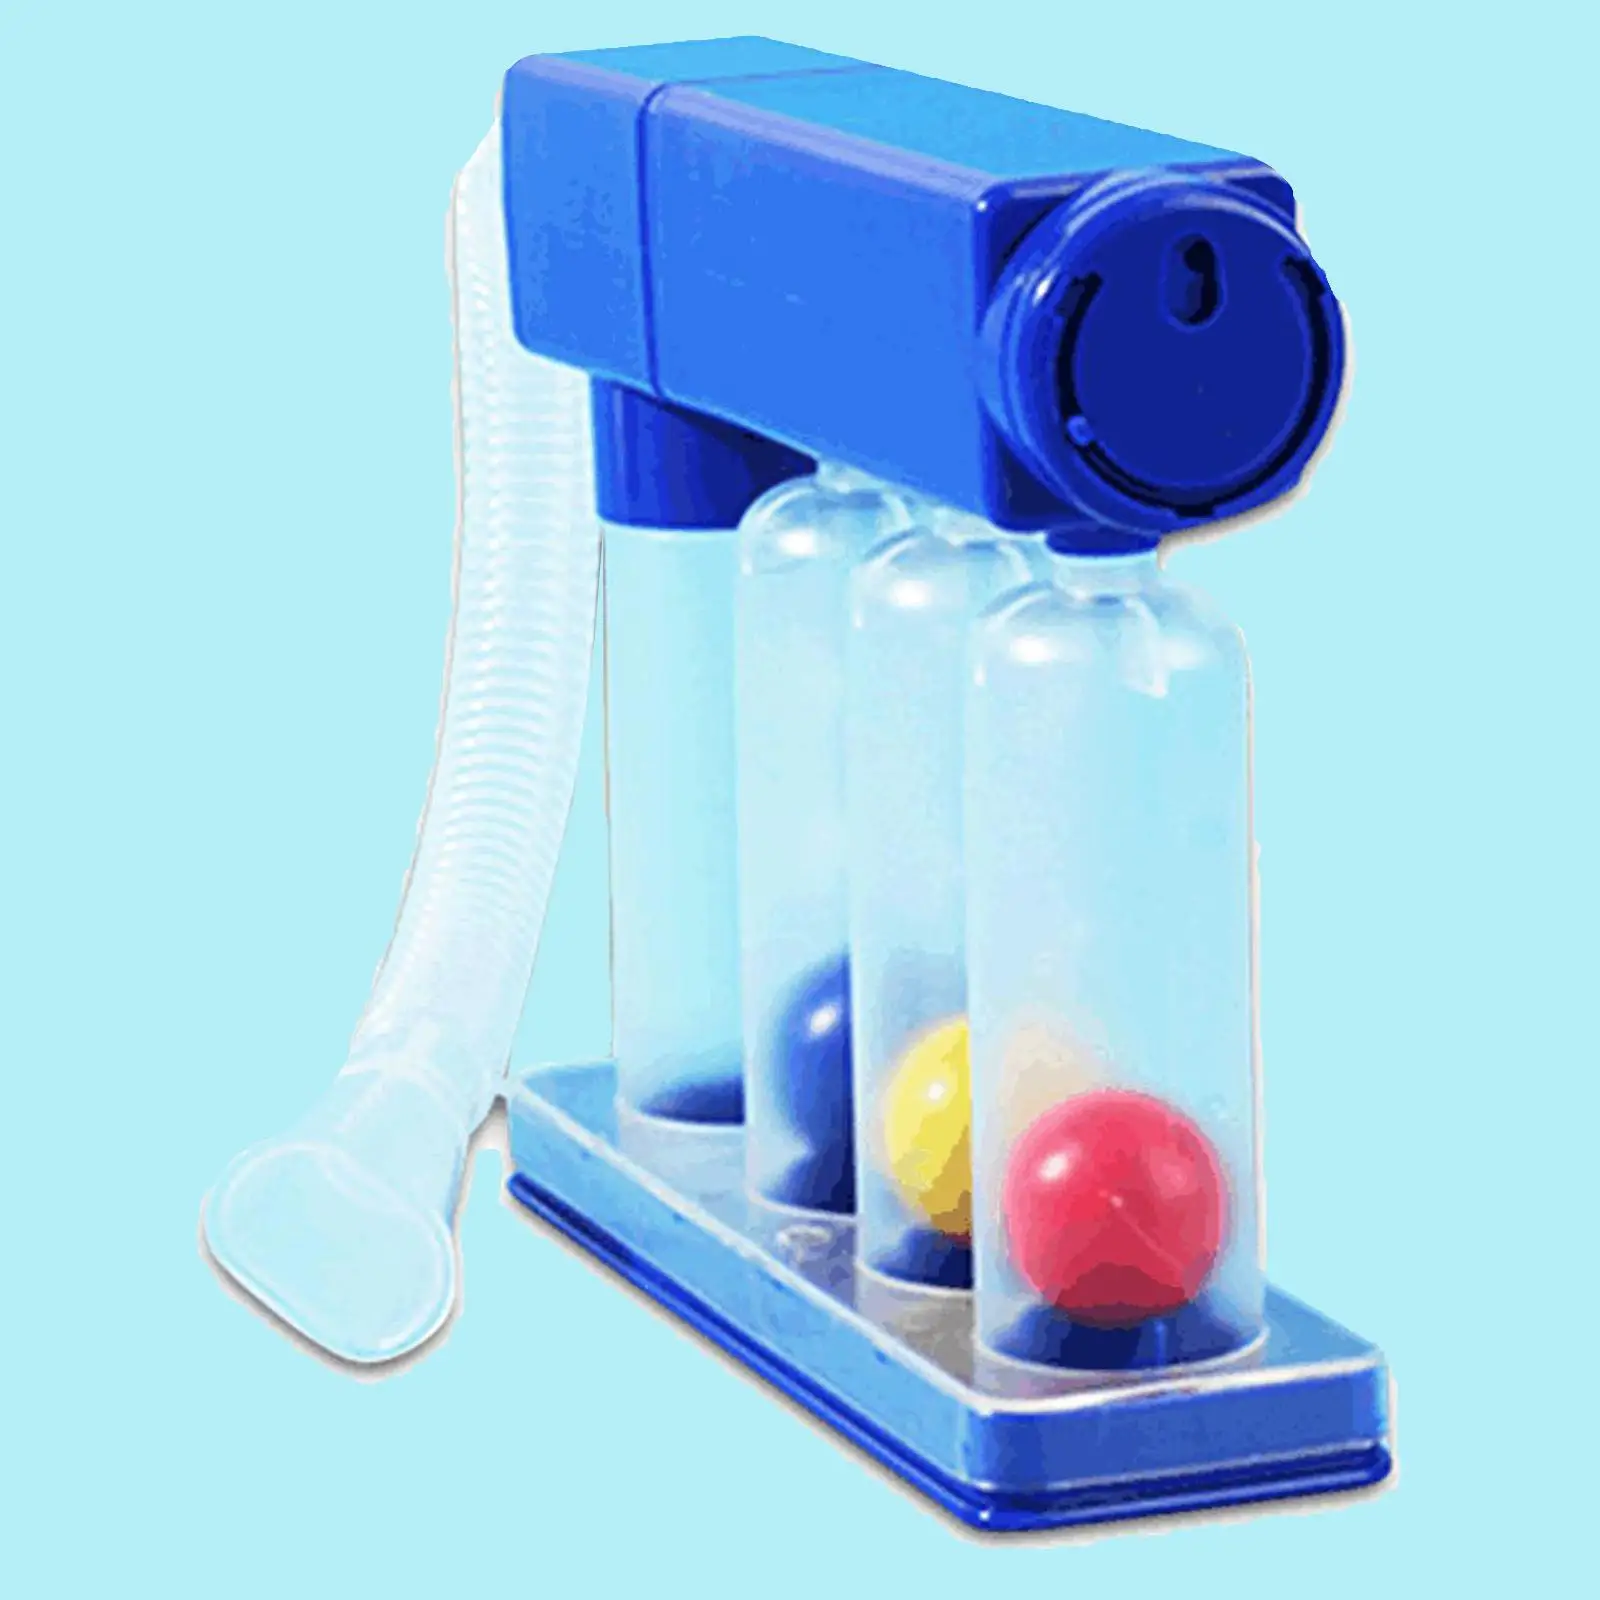 Breathing Exerciser Device Breath Lung Exerciser 3 Ball Device 2 in 1 Equipment Breathing Treatment Machine Breathing Trainer